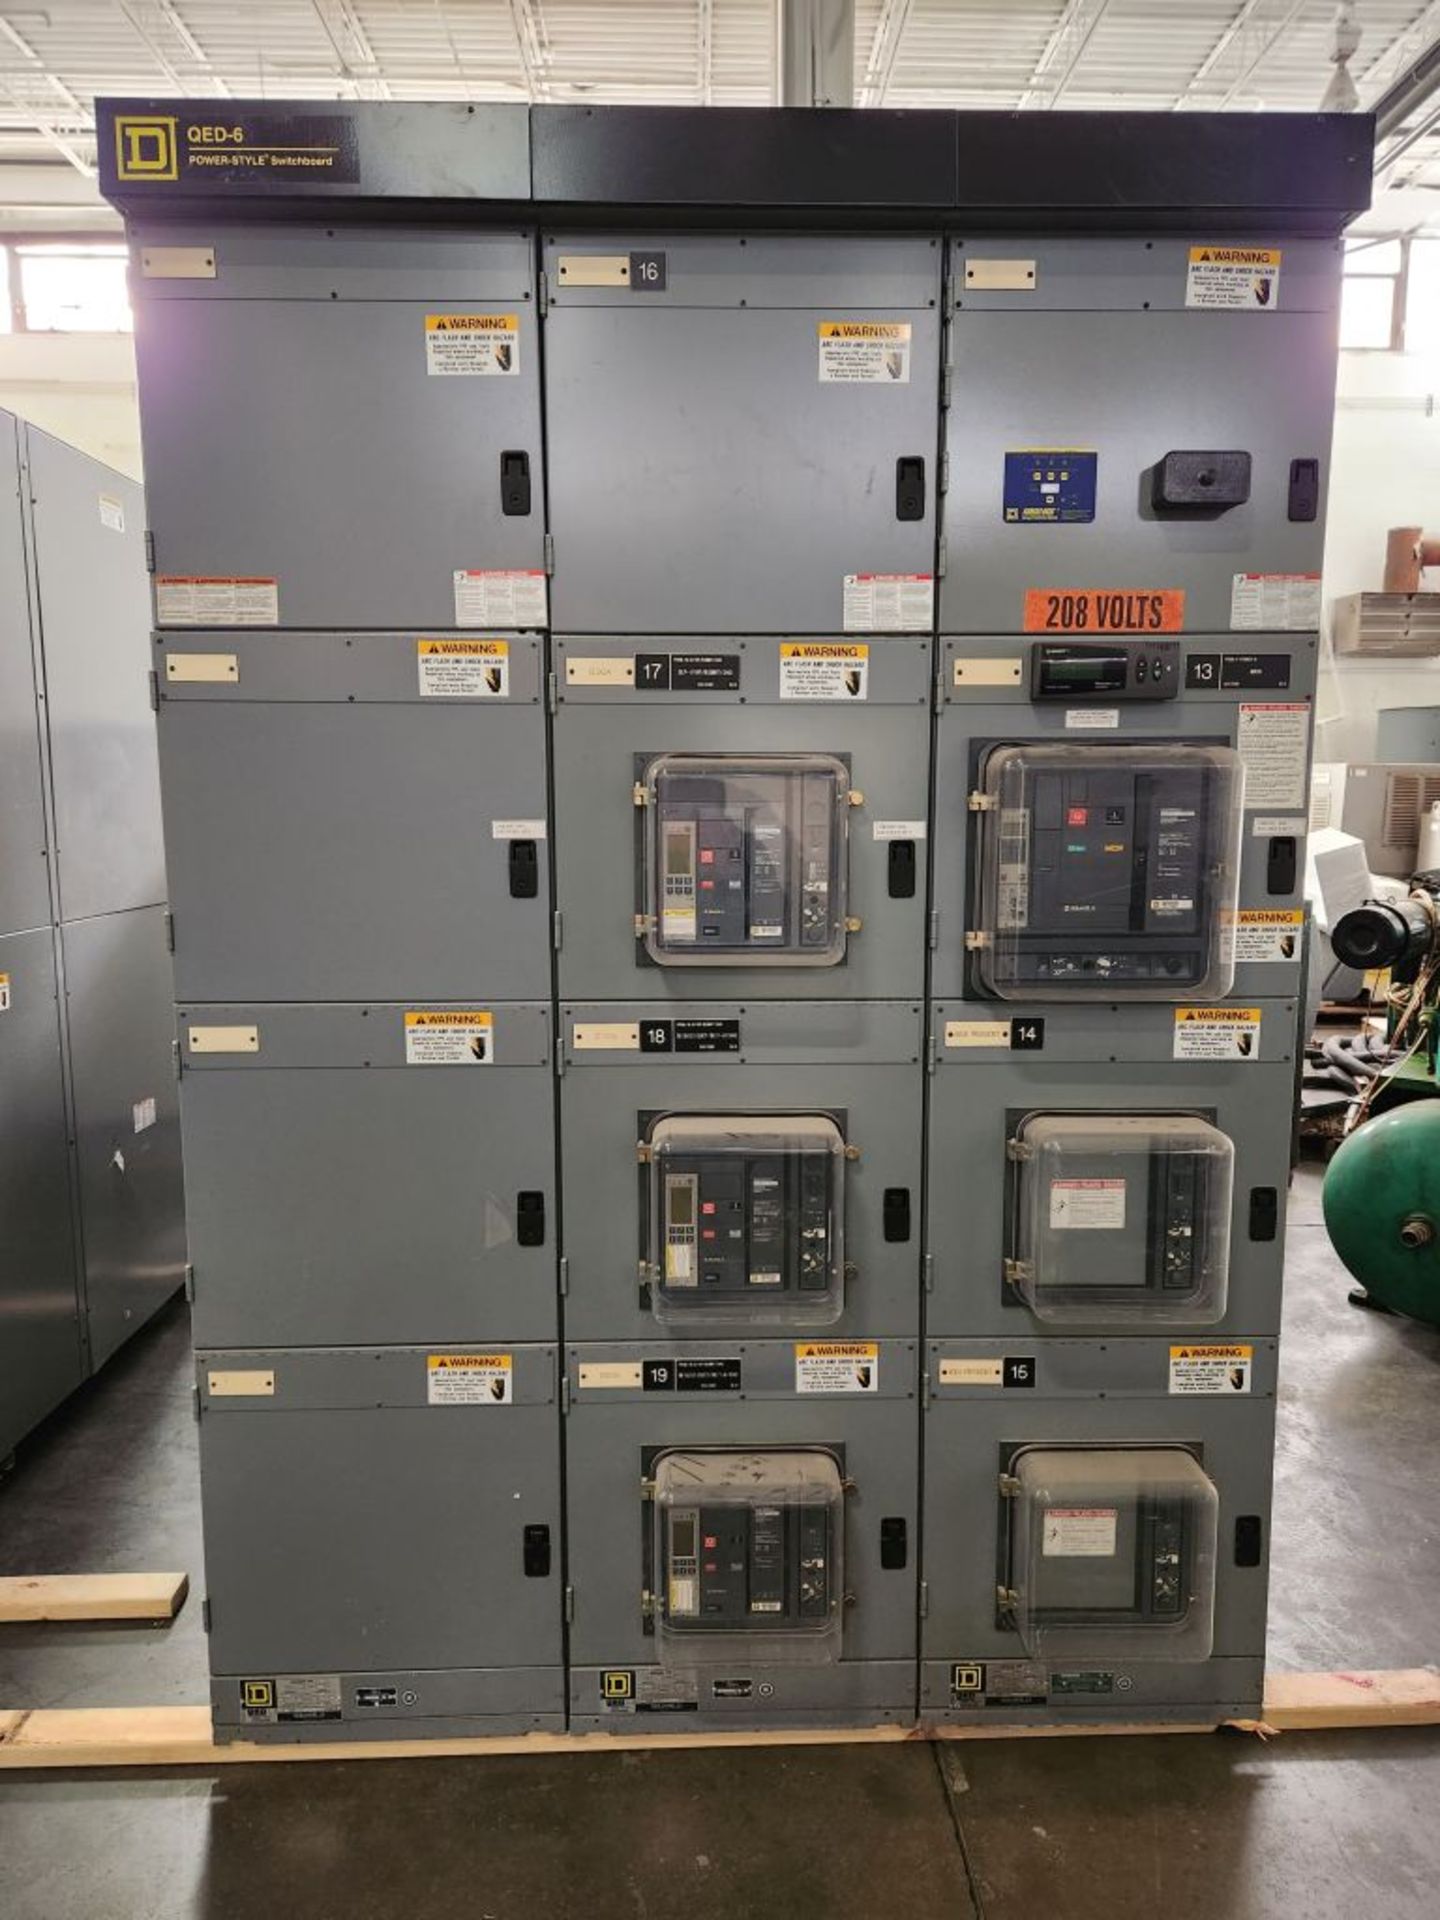 Minneapolis, MN - Square D QED-6 Power Style 2000A Switchgear